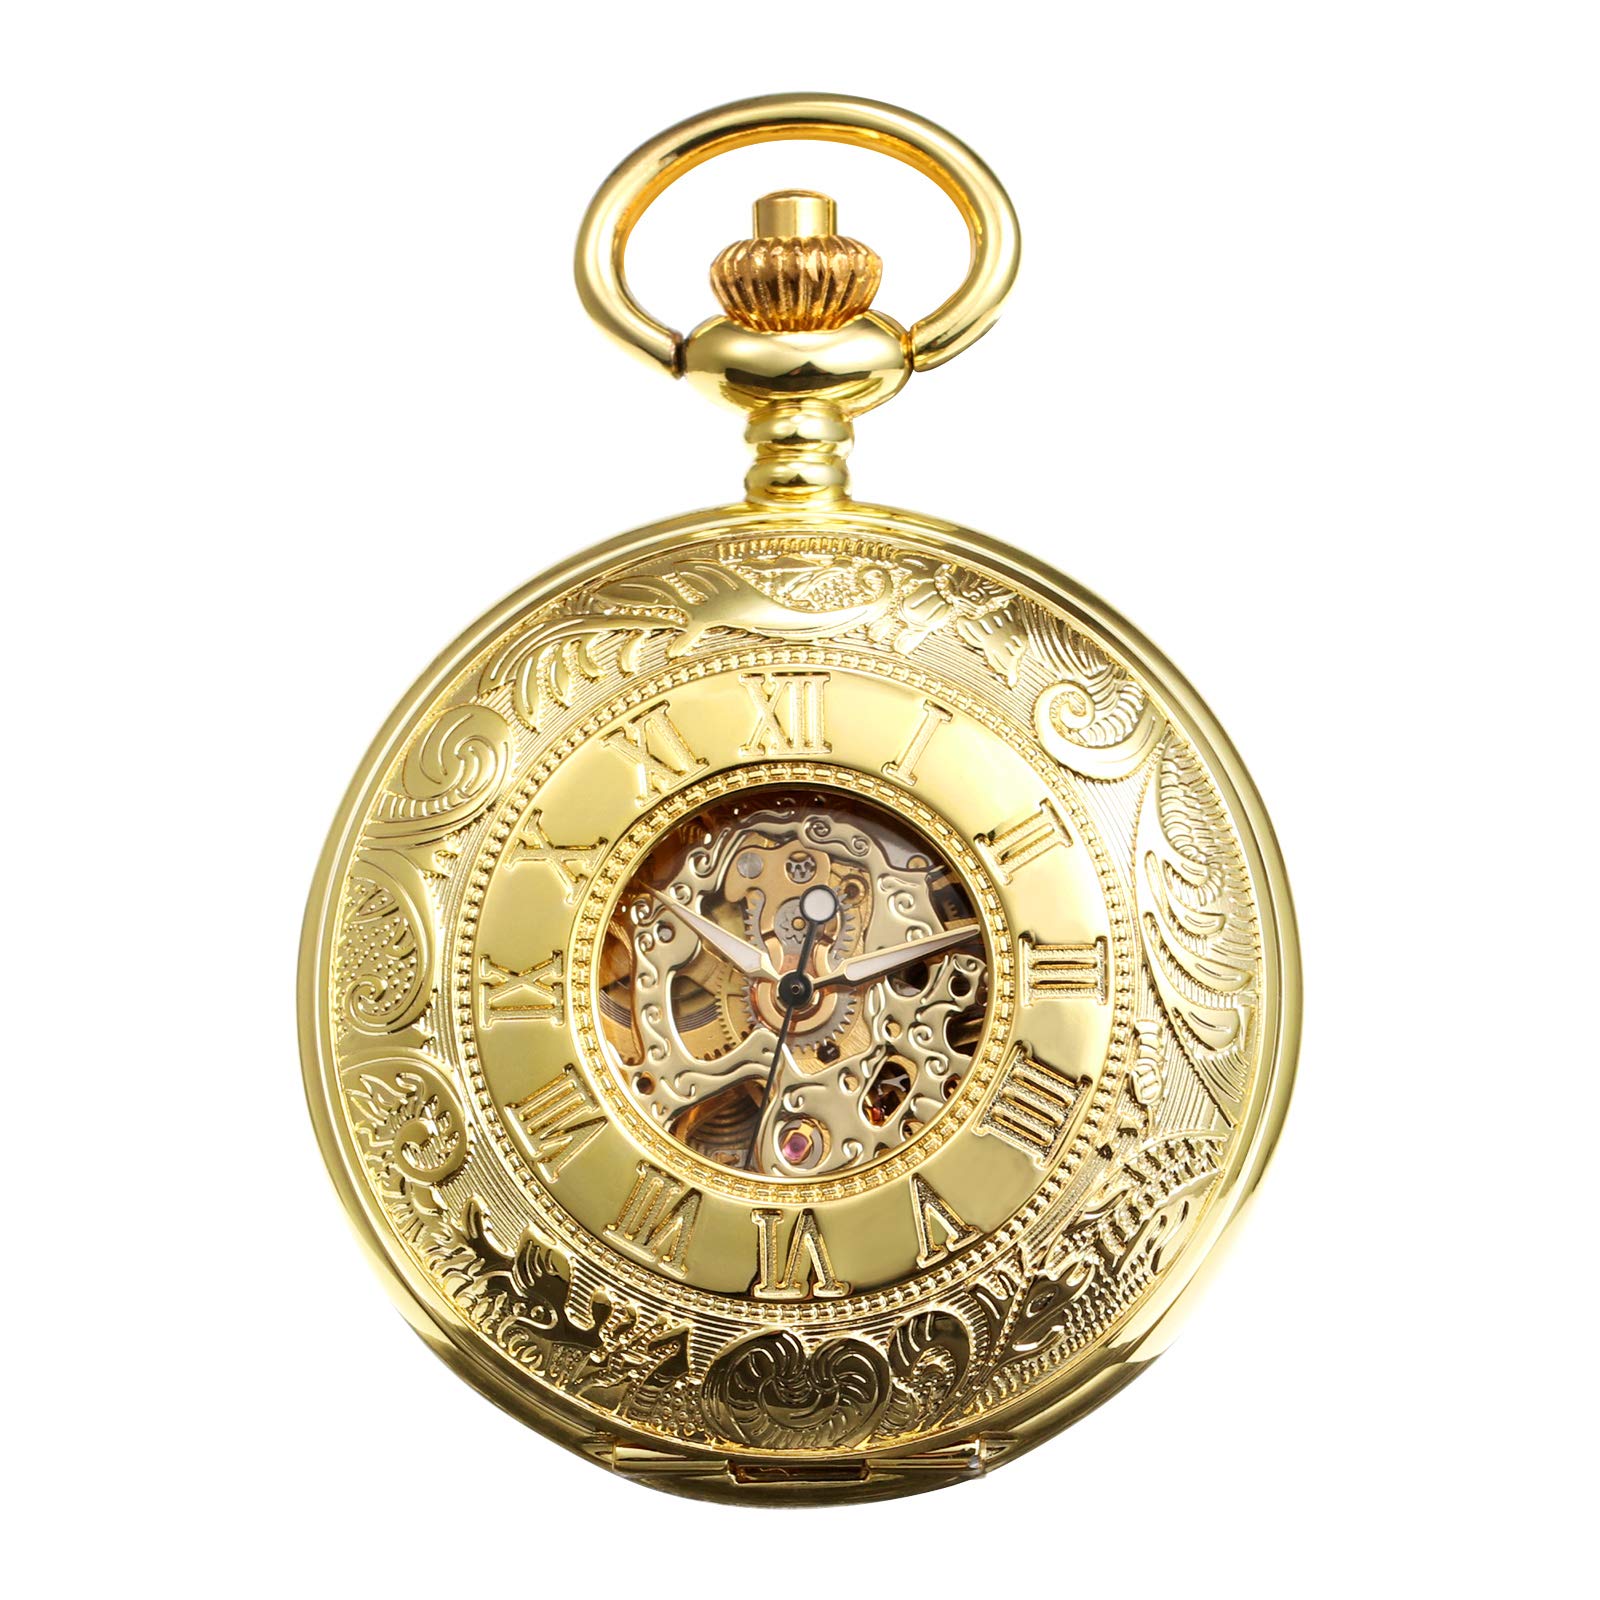 TREEWETO Men's Mechanical Skeleton Pocket Watch for Mens Women Blue Roman Numerals Dial Double Case Pocket Watches